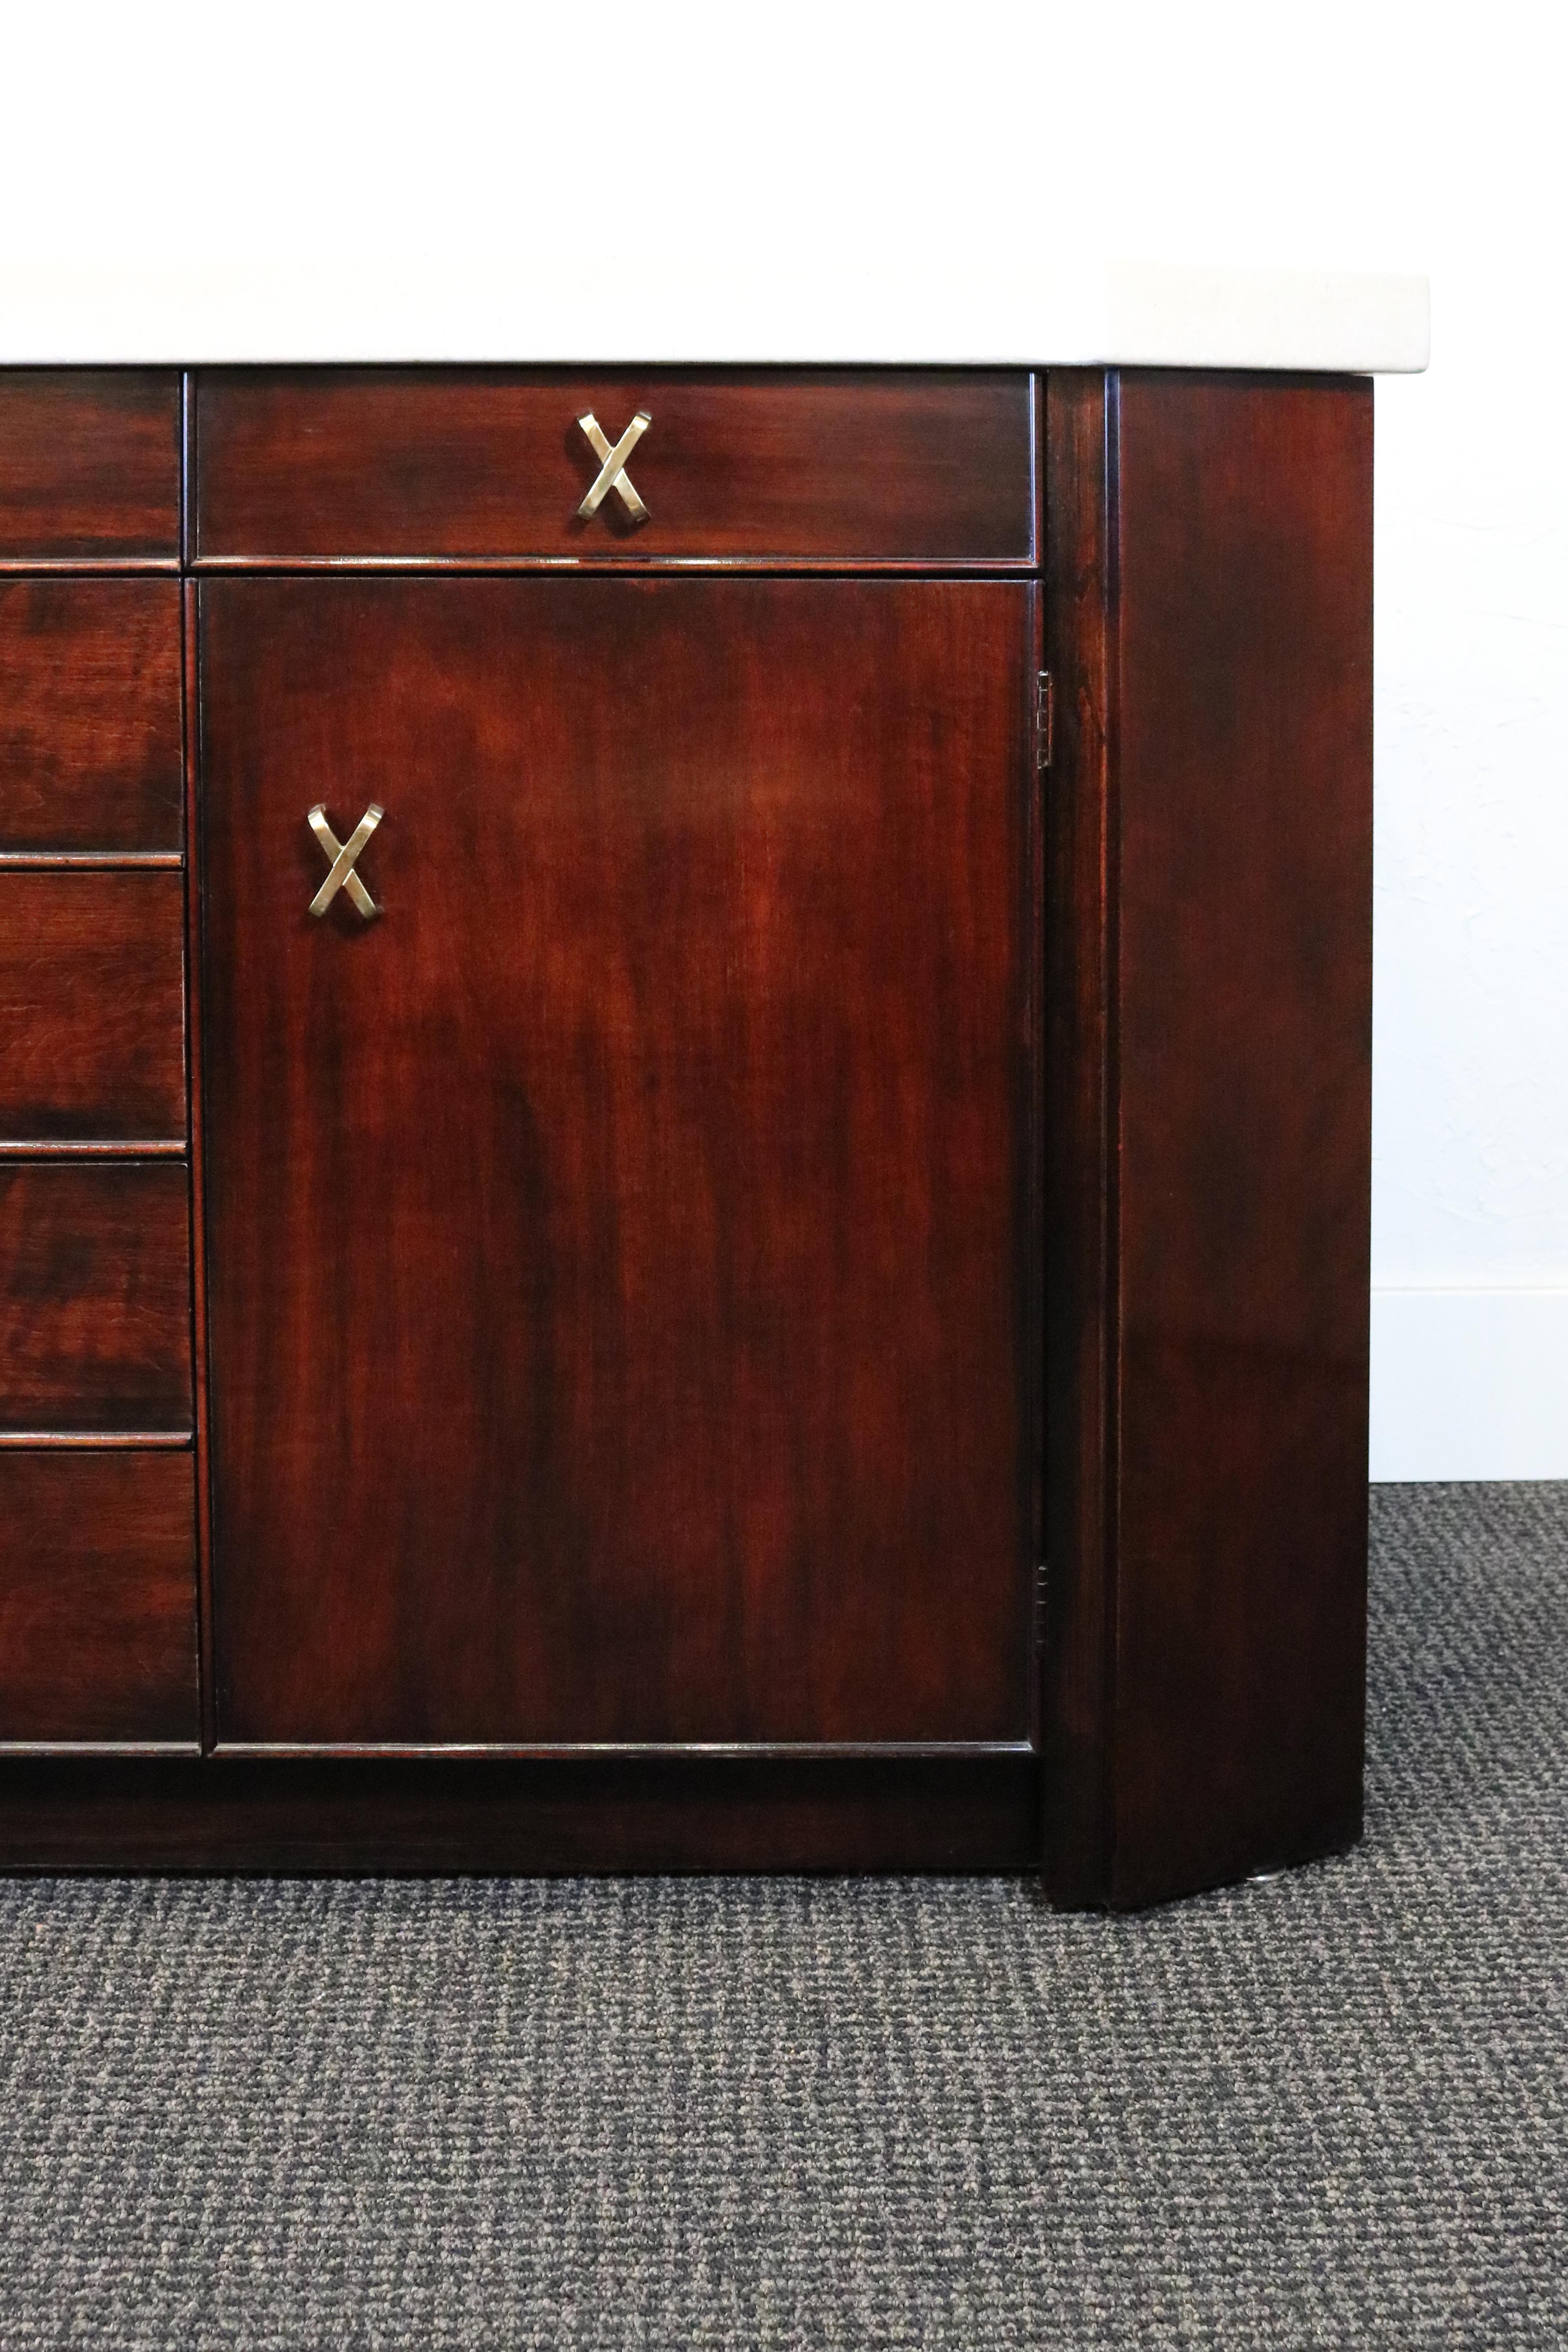 Mid-20th Century Sideboard by Paul Frankl for Johnson Furniture Co. in Mahogany and Cork